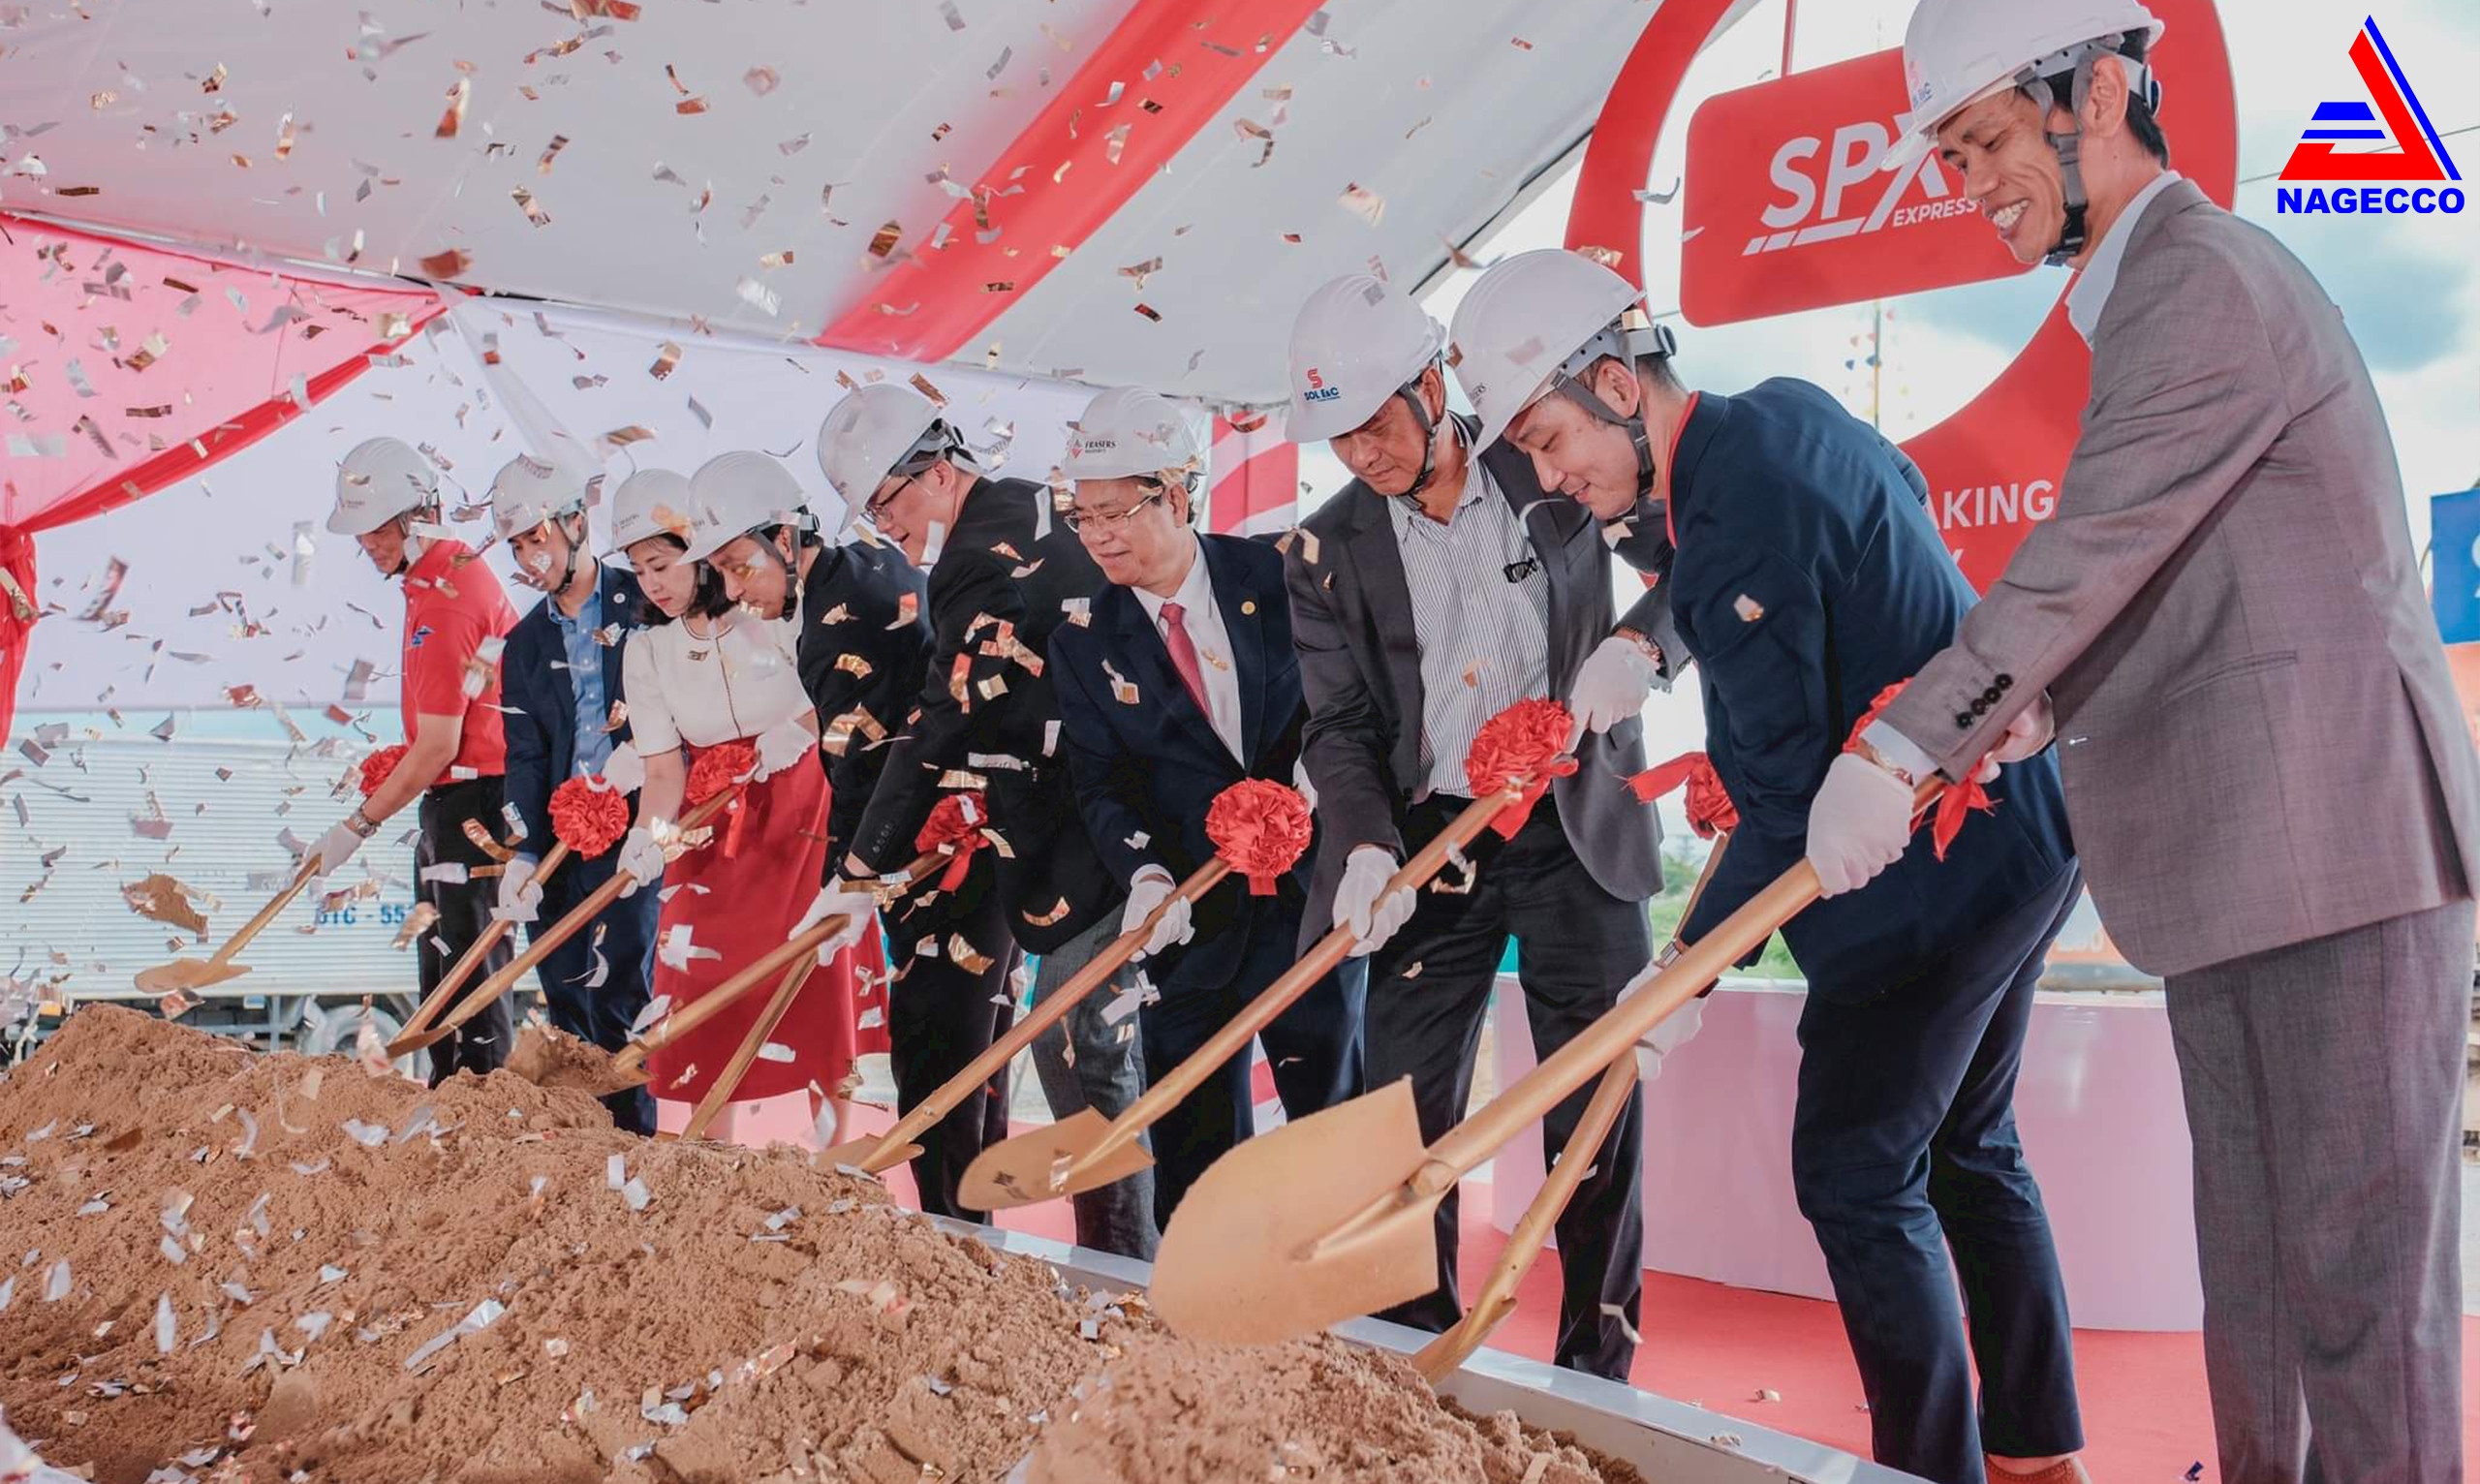 SPX AUTOMATED SORTING CENTER GROUNDBREAKING CEREMONY